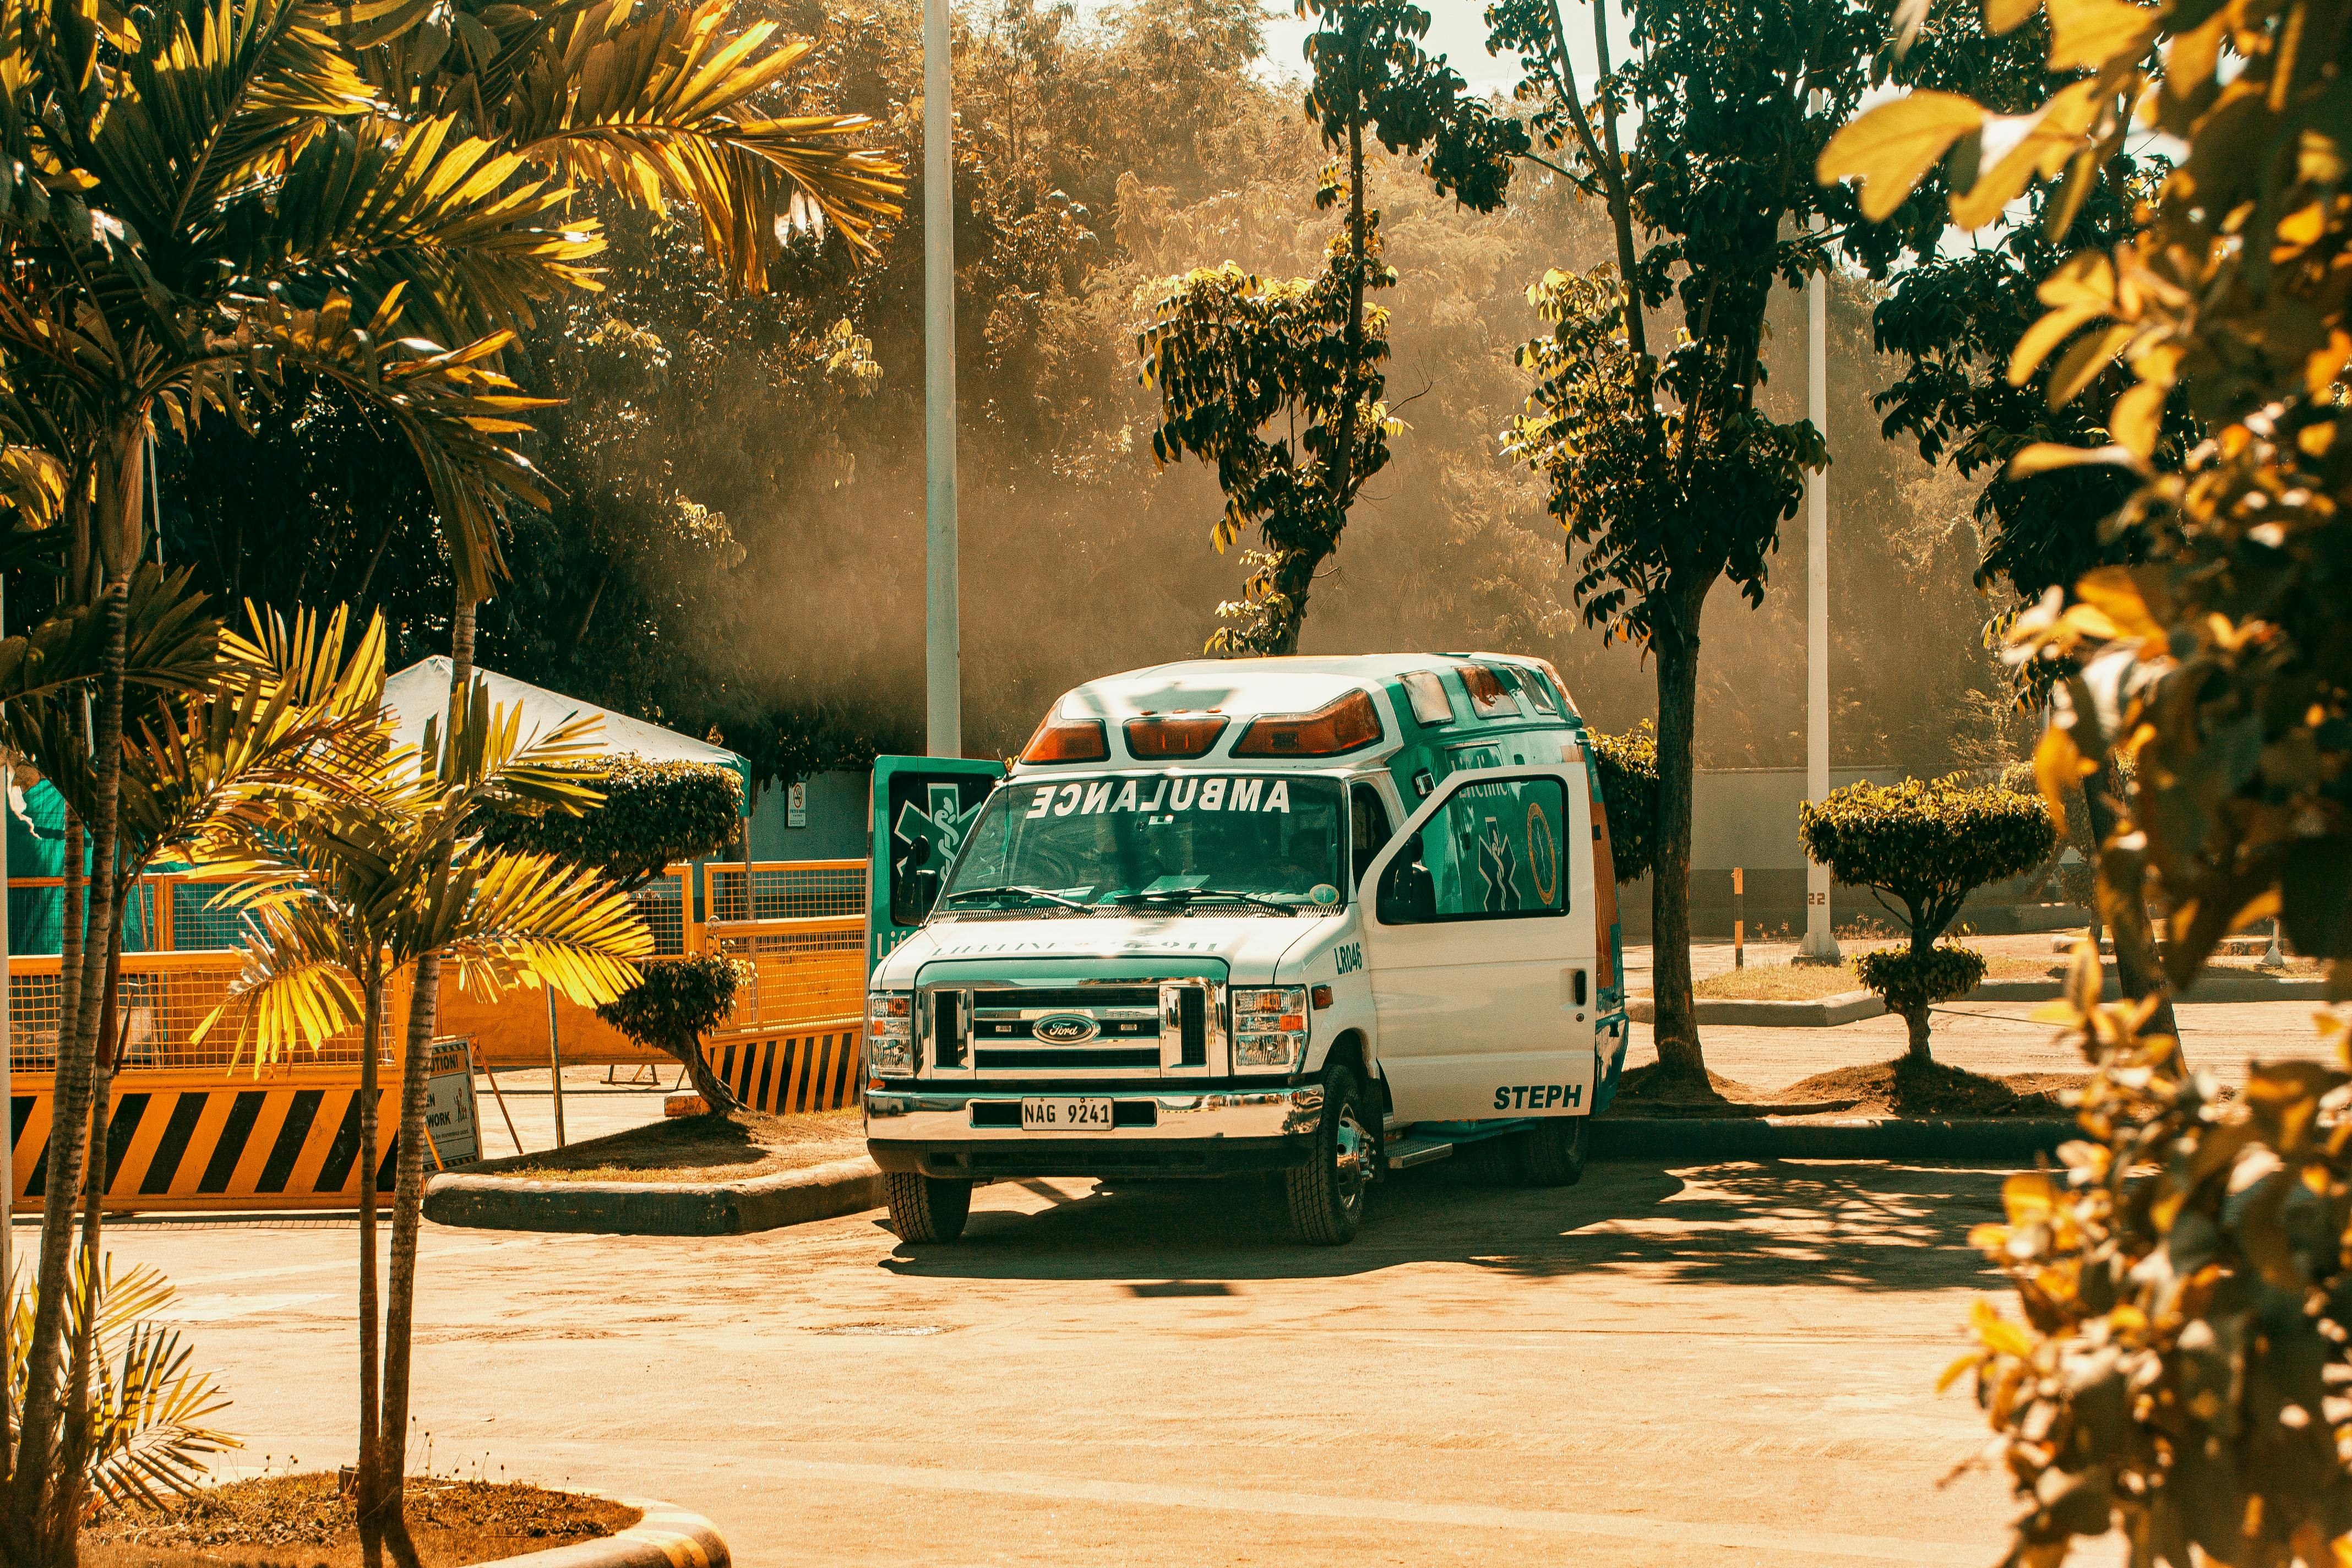 An ambulance in a parking lot. | Photo: Pexels